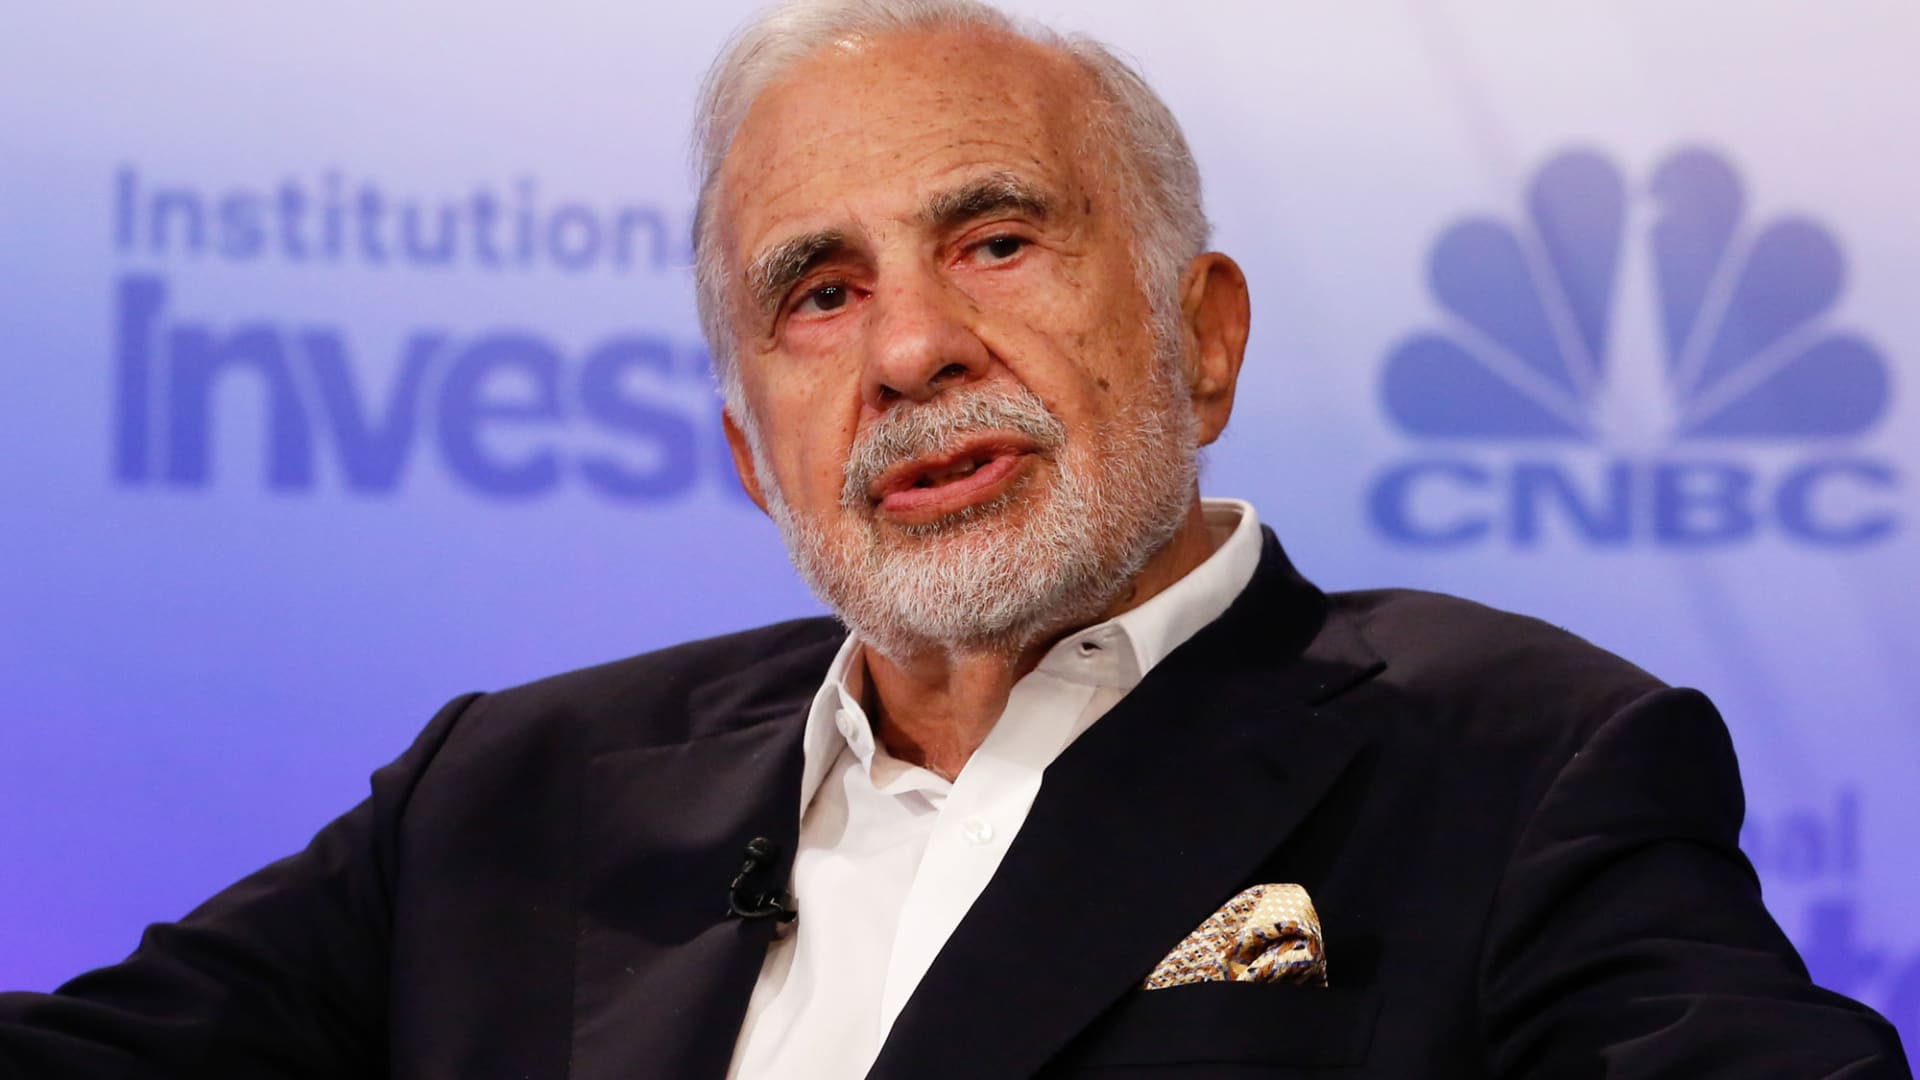 Carl Icahn’s company stock falls as much as 20% after prosecutors seek financial information